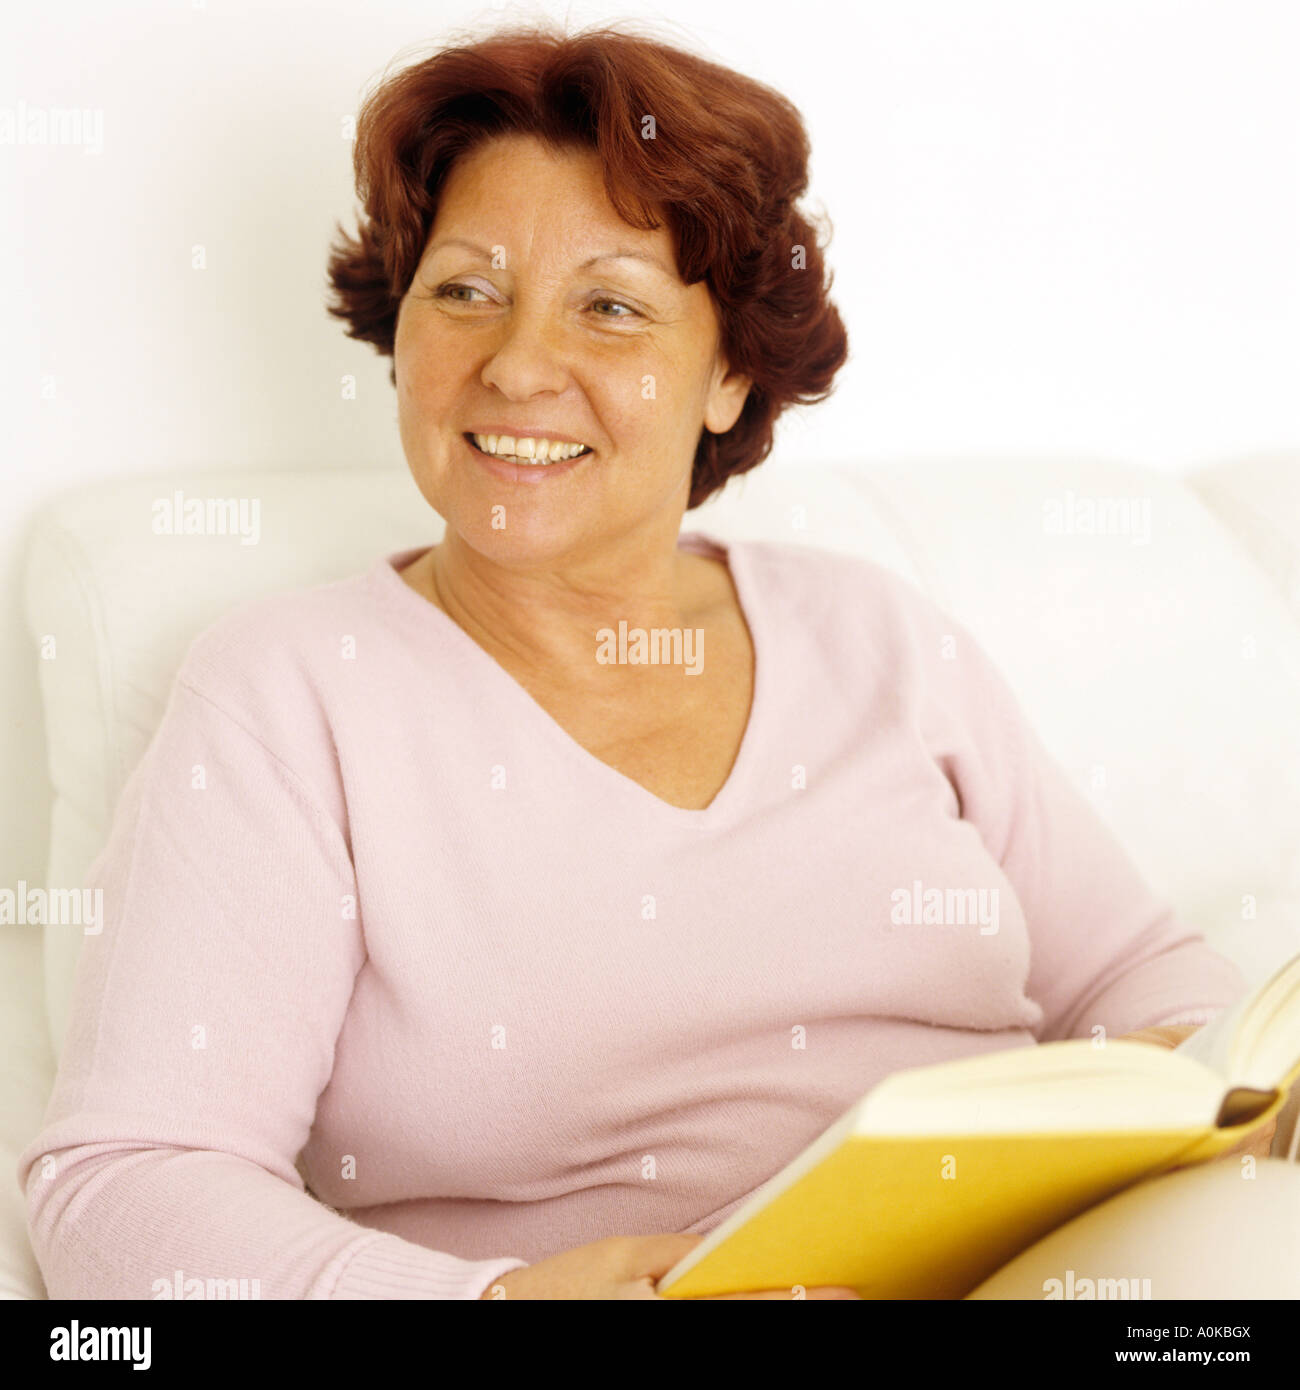 Smiling woman sitting on sofa with book Banque D'Images